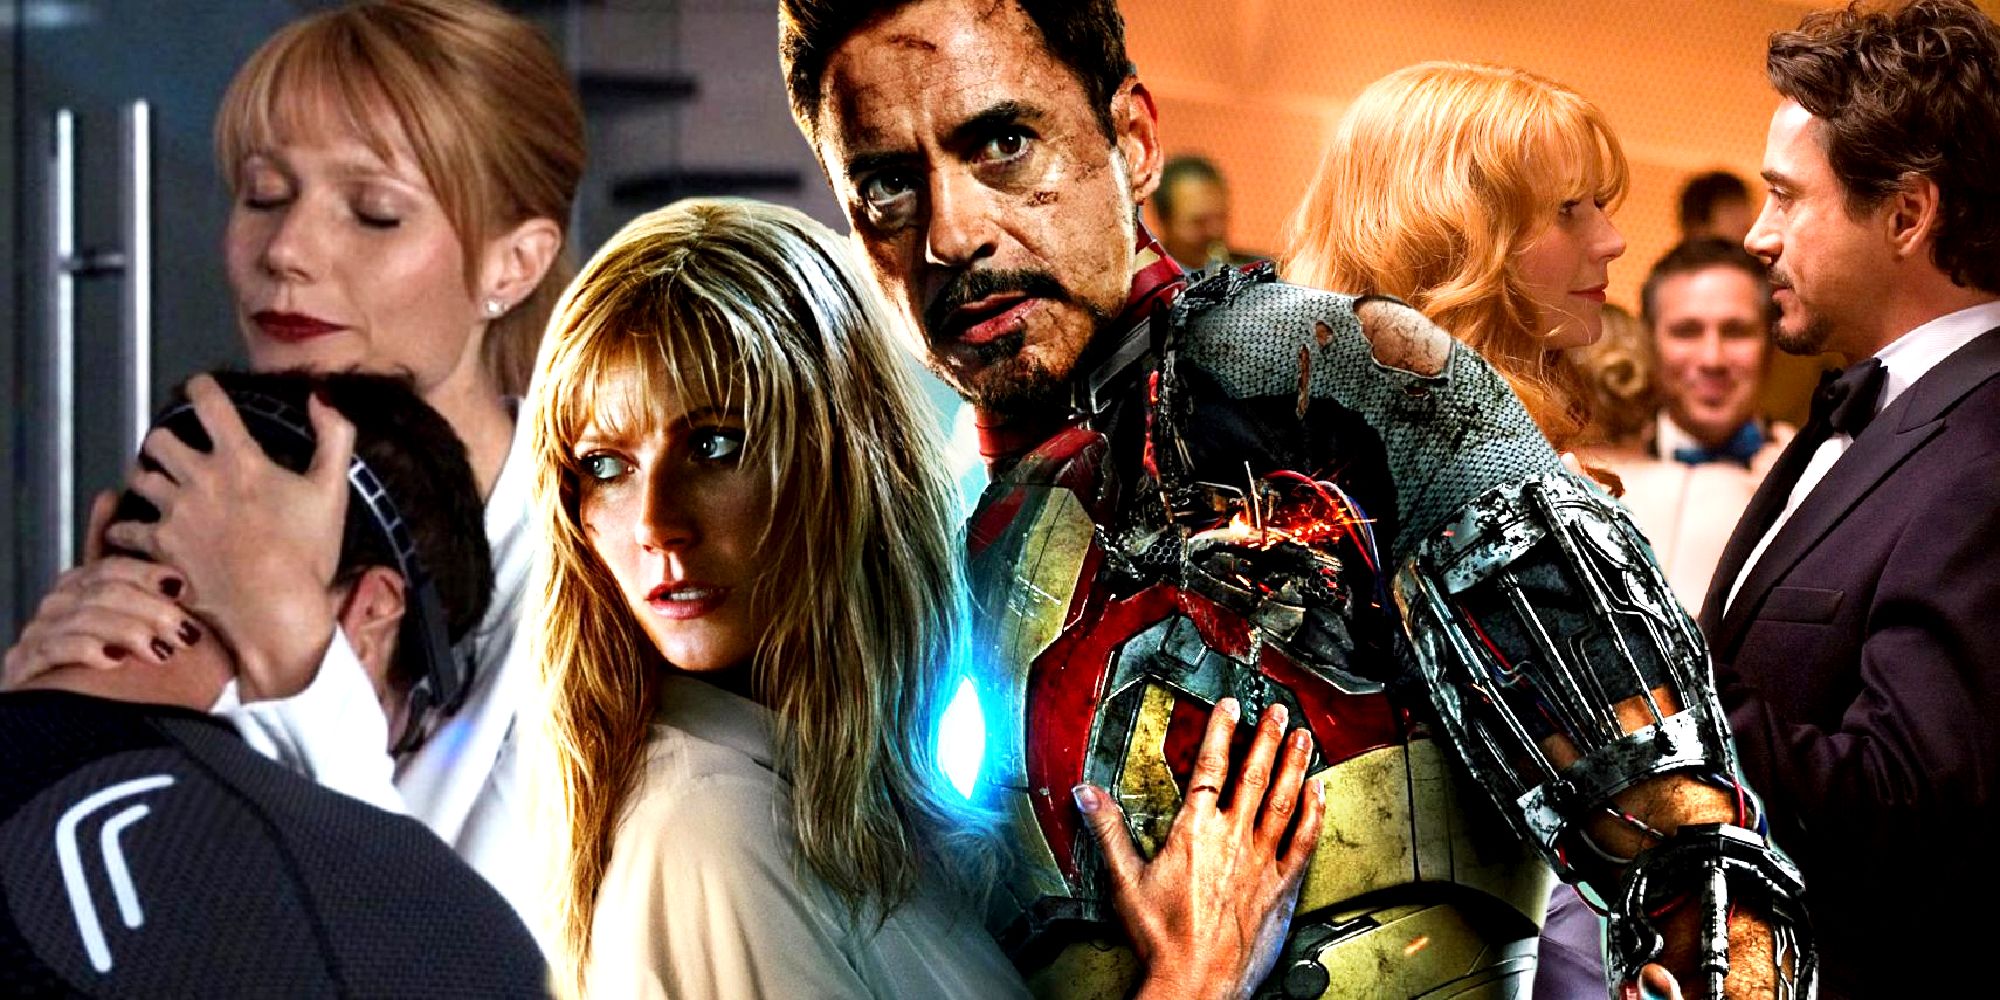 Tony Stark and Pepper Potts' Romantic Relationship in the MCU Iron Man Trilogy